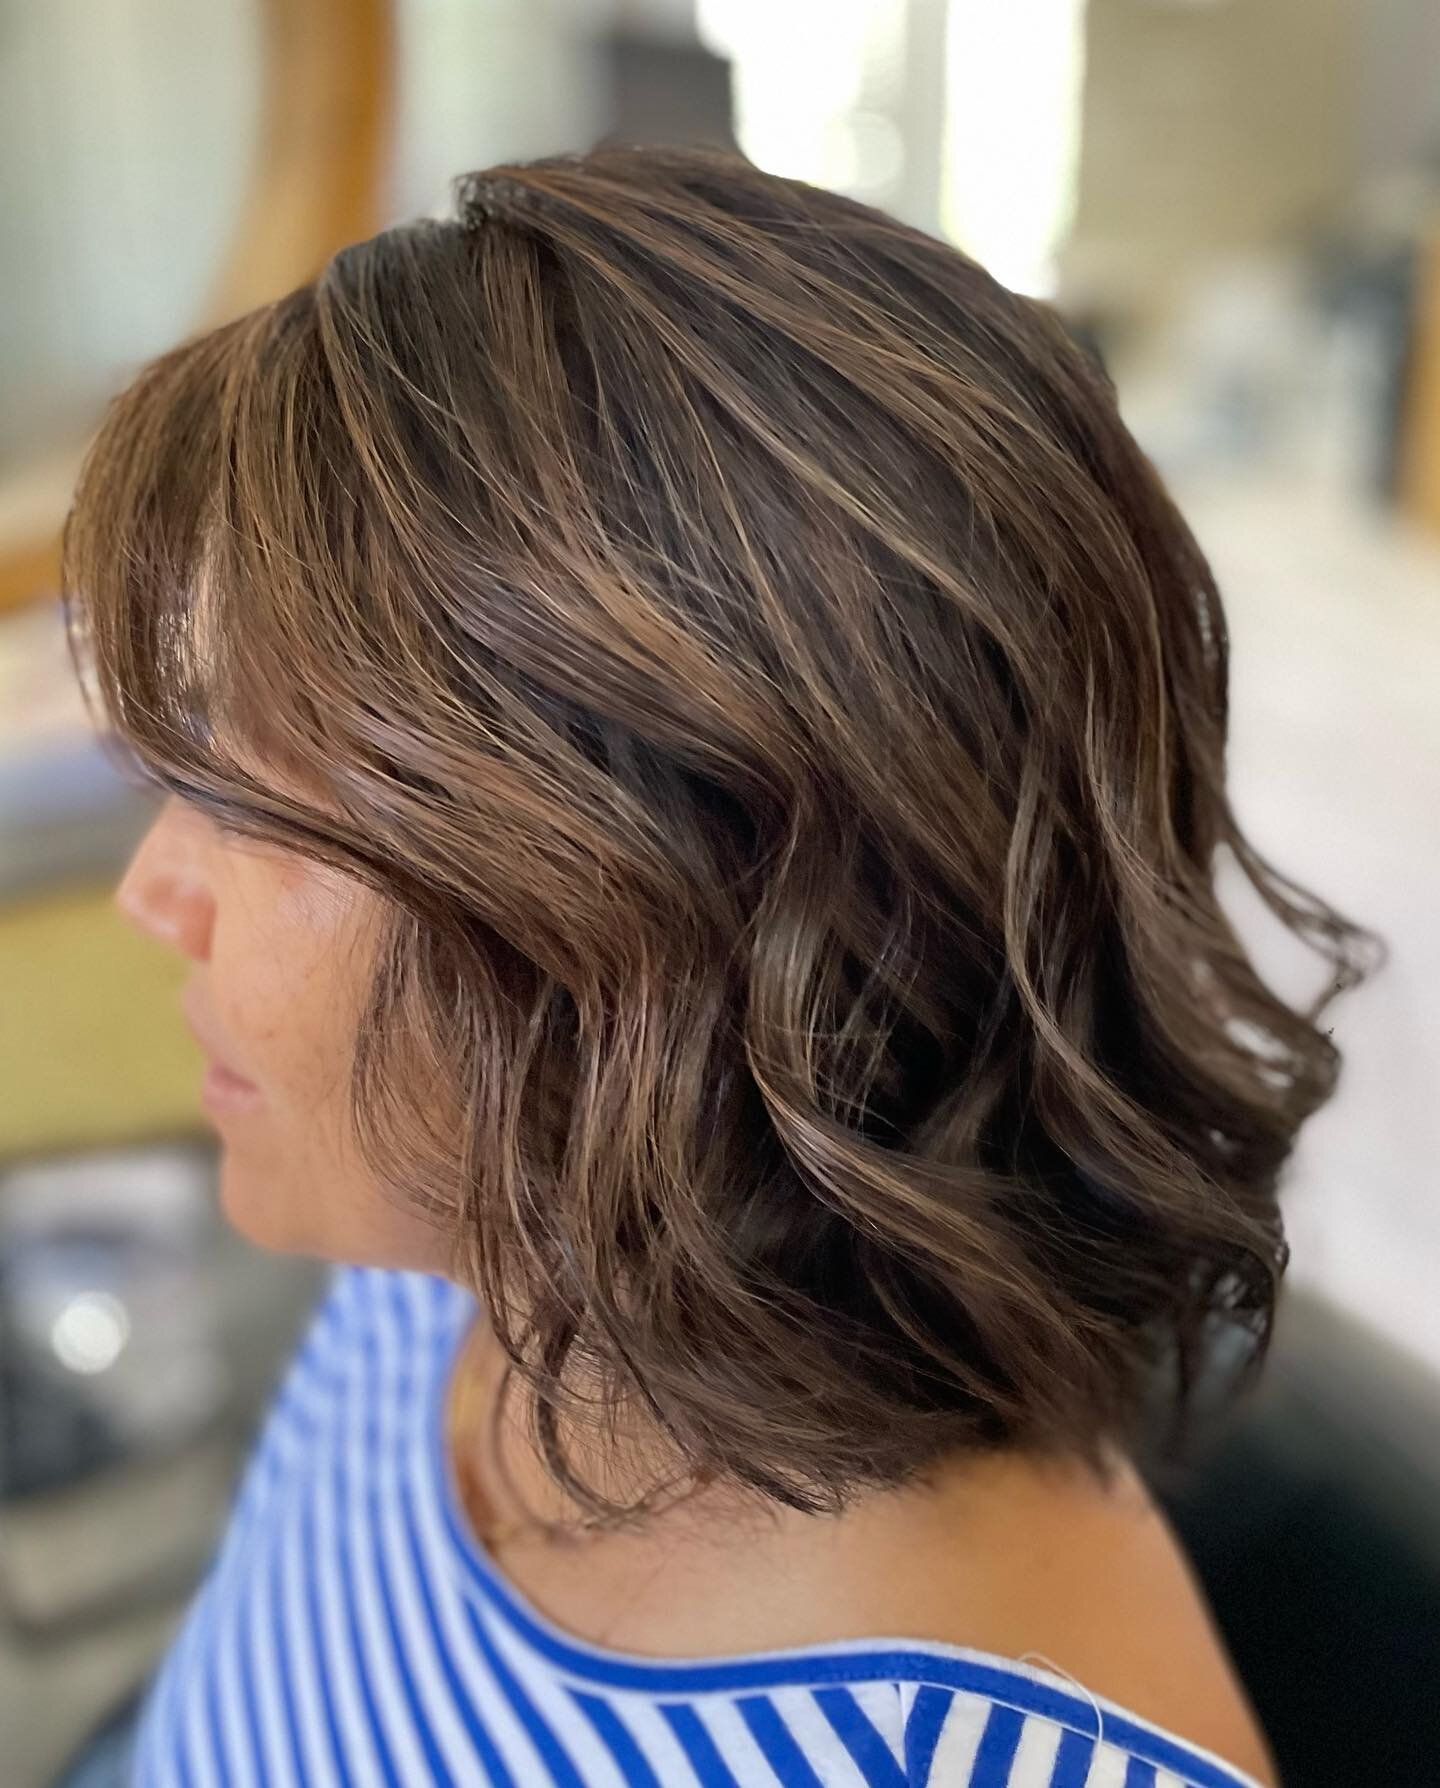 Absolutely loved working with Veronica. It was her first visit and we wanted to brighten up her color for the summer but also make it low maintenance and natural looking. We did a root smudge with some foilyage.
&bull;
&bull;
&bull;

#tempesalon #tem